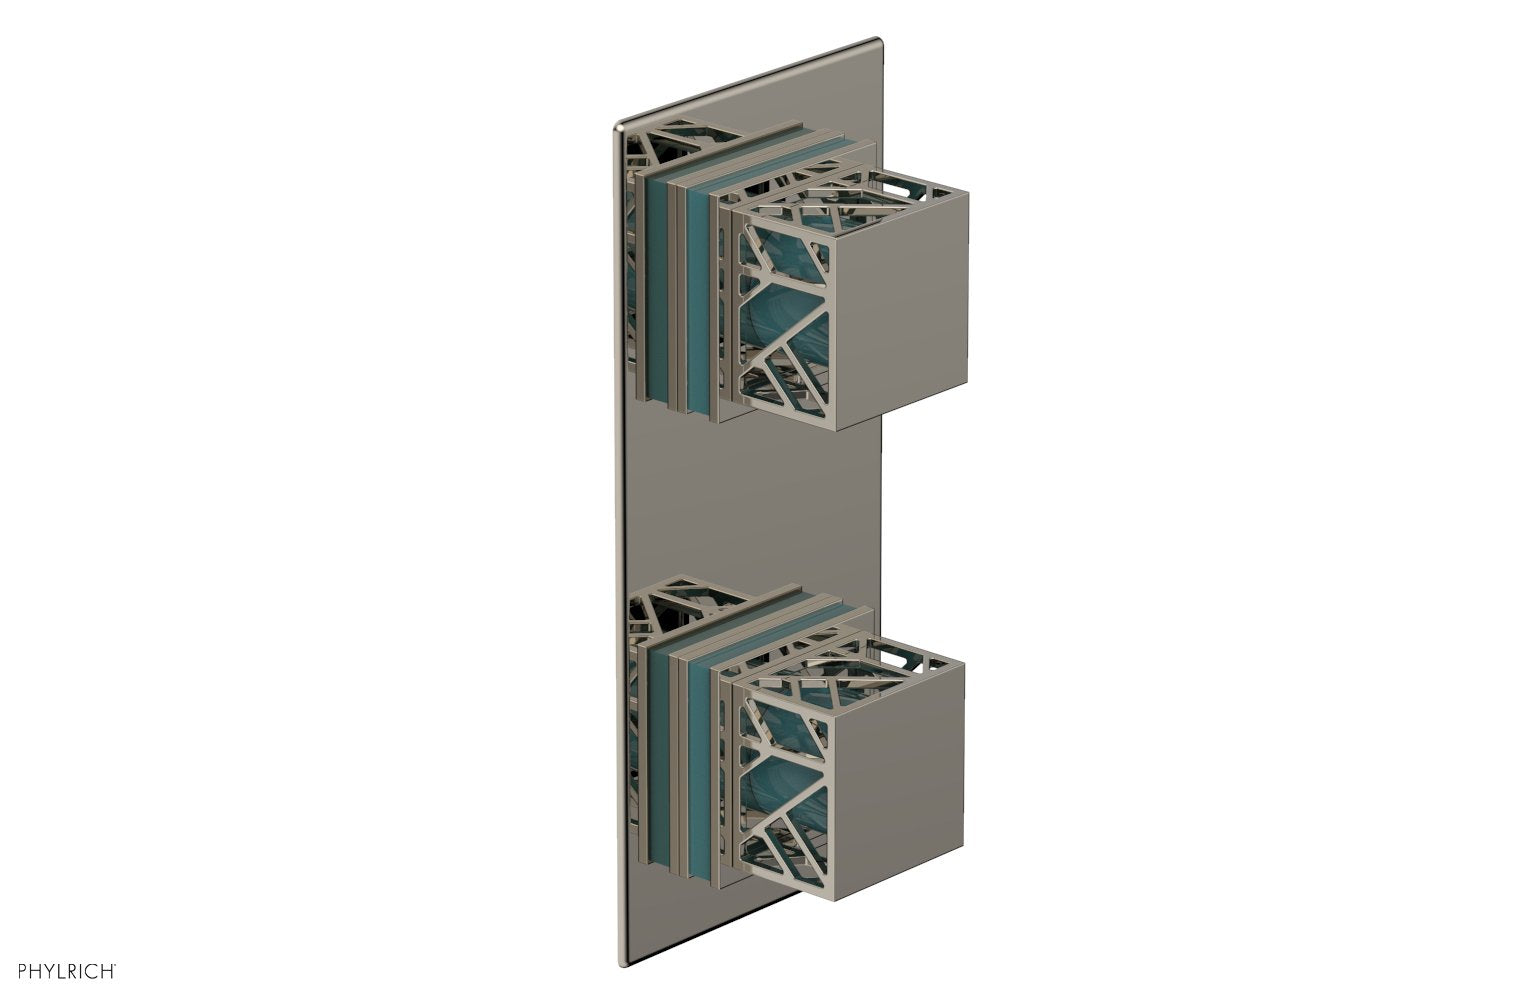 Phylrich JOLIE Thermostatic Valve with Volume Control or Diverter with "Turquoise" Accents